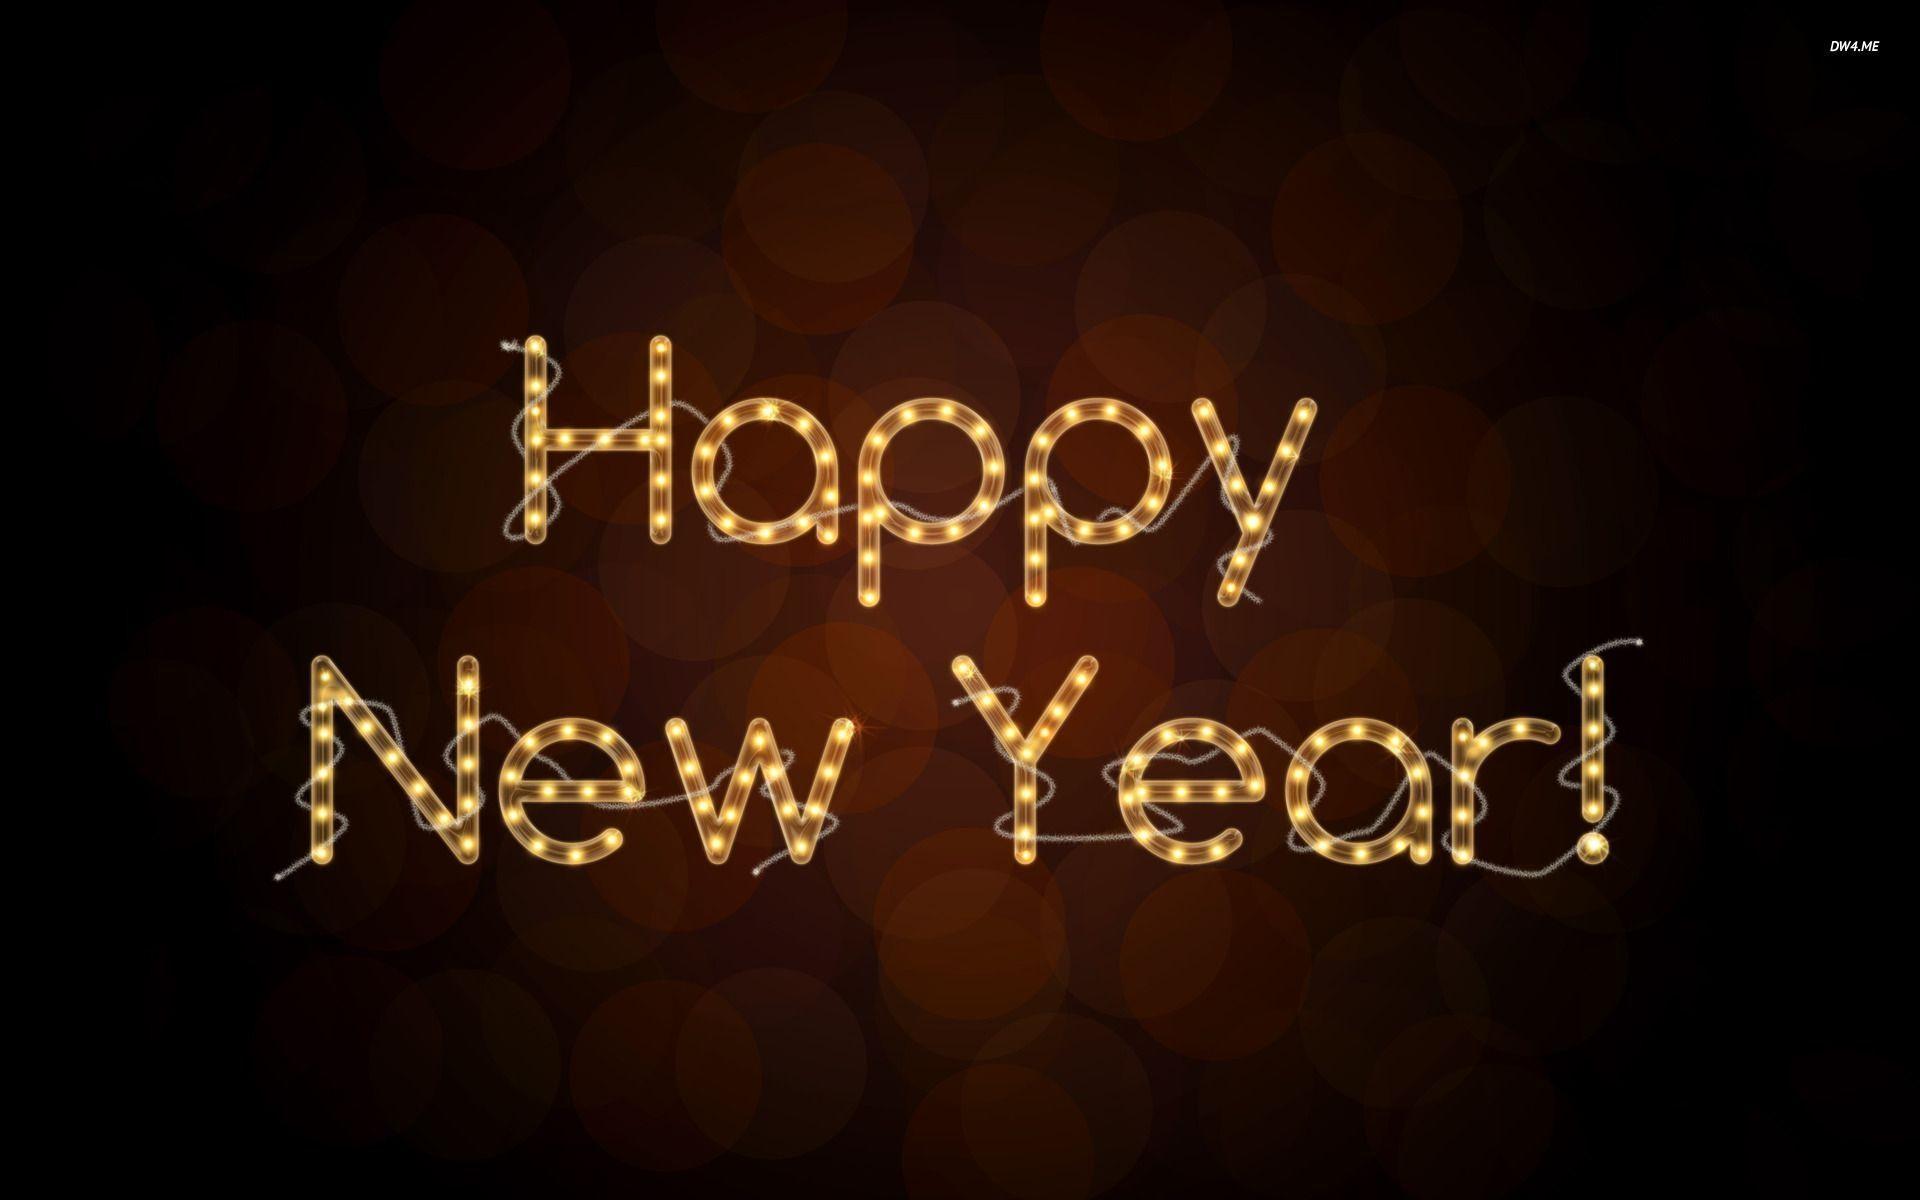 Download Happy New Year 2015 HD Wallpaper for Desktop PC. Play